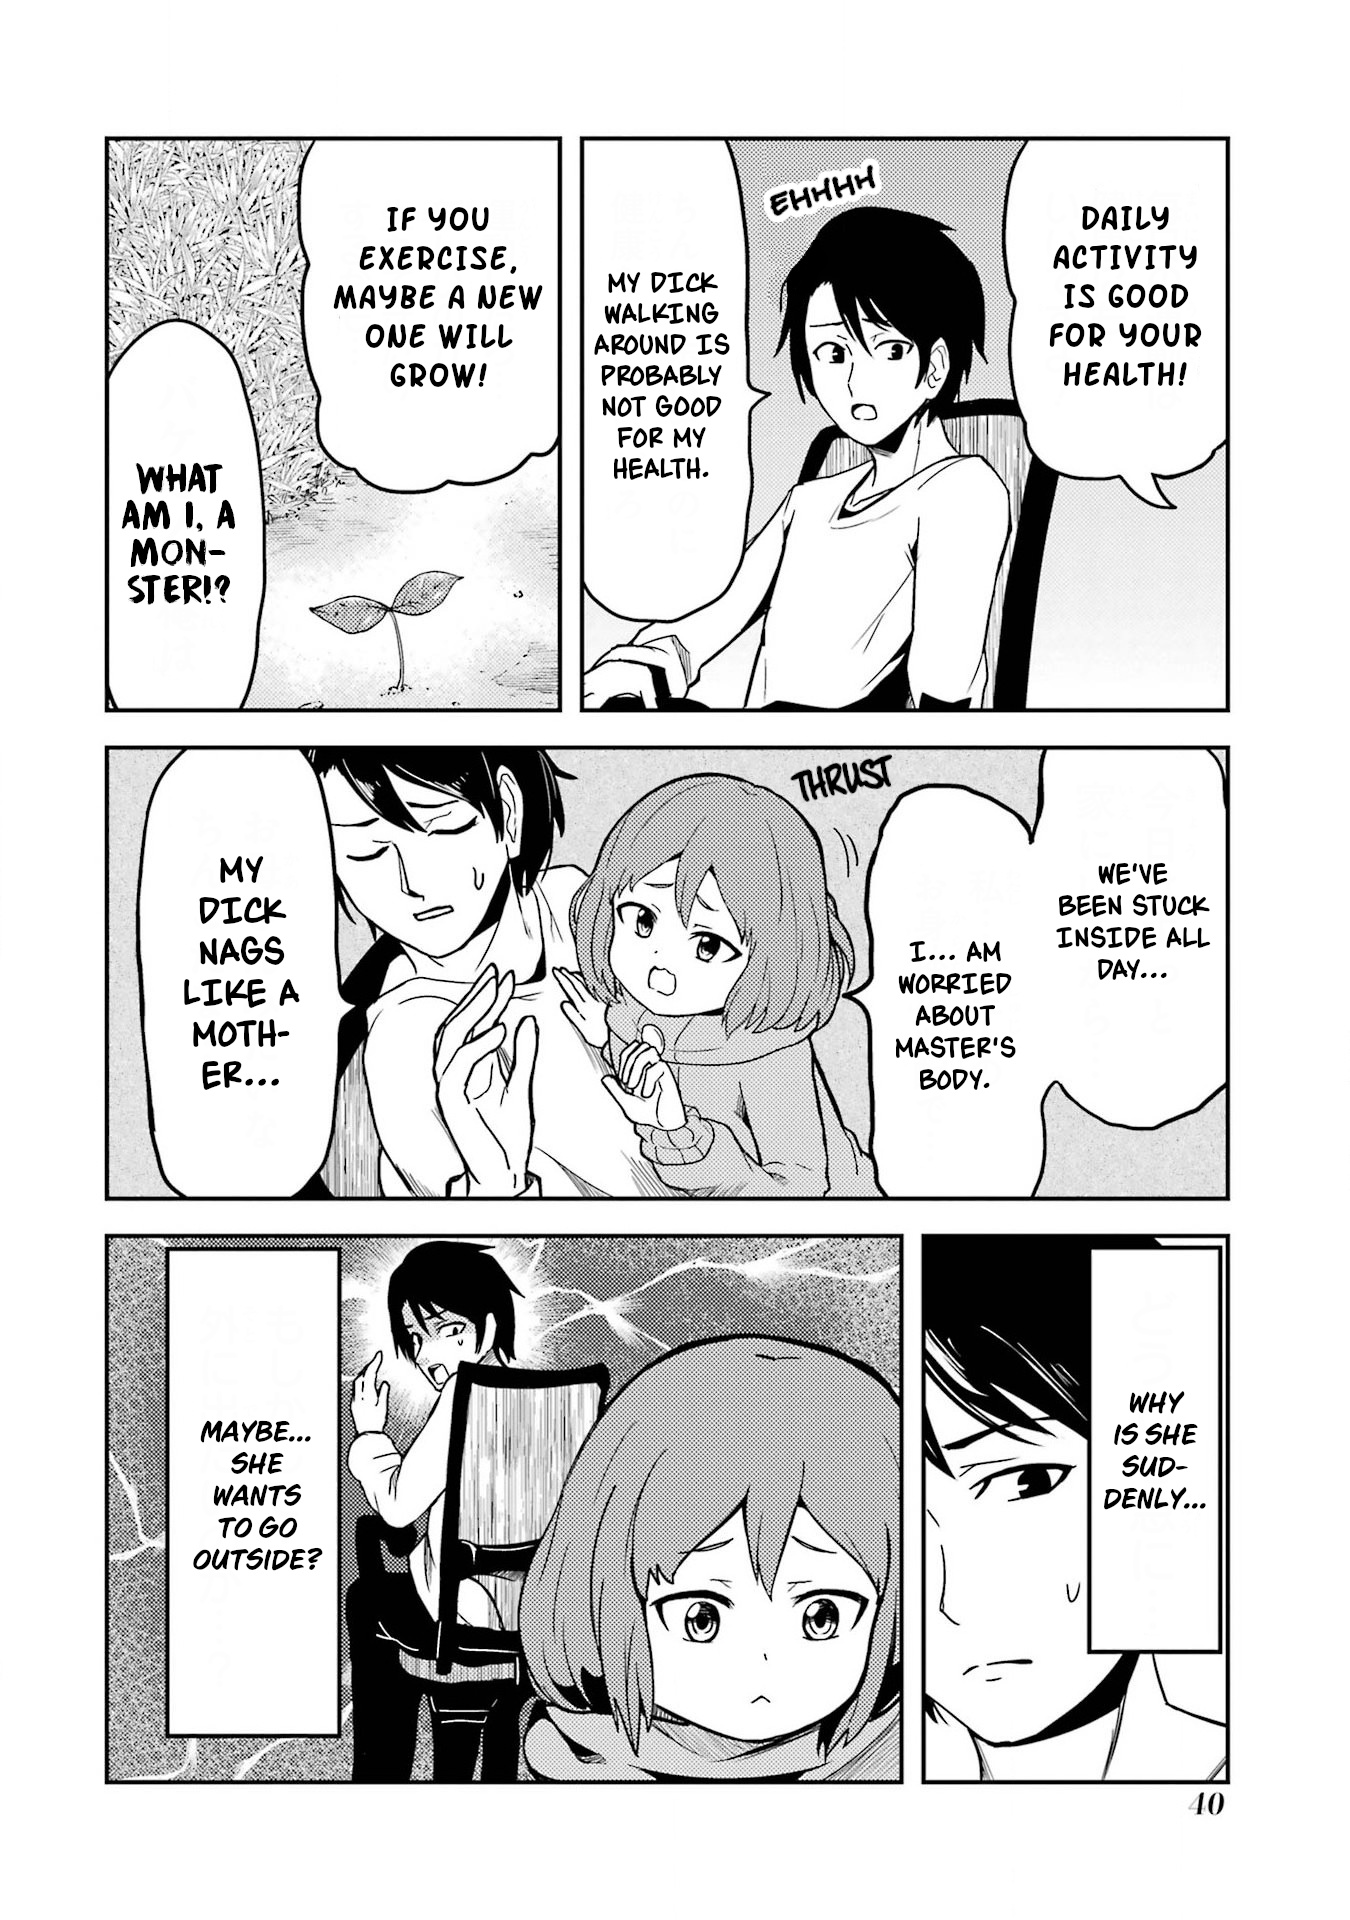 Turns Out My Dick Was A Cute Girl Vol.1 Chapter 3: The Dick That Goes Outside. - Picture 2